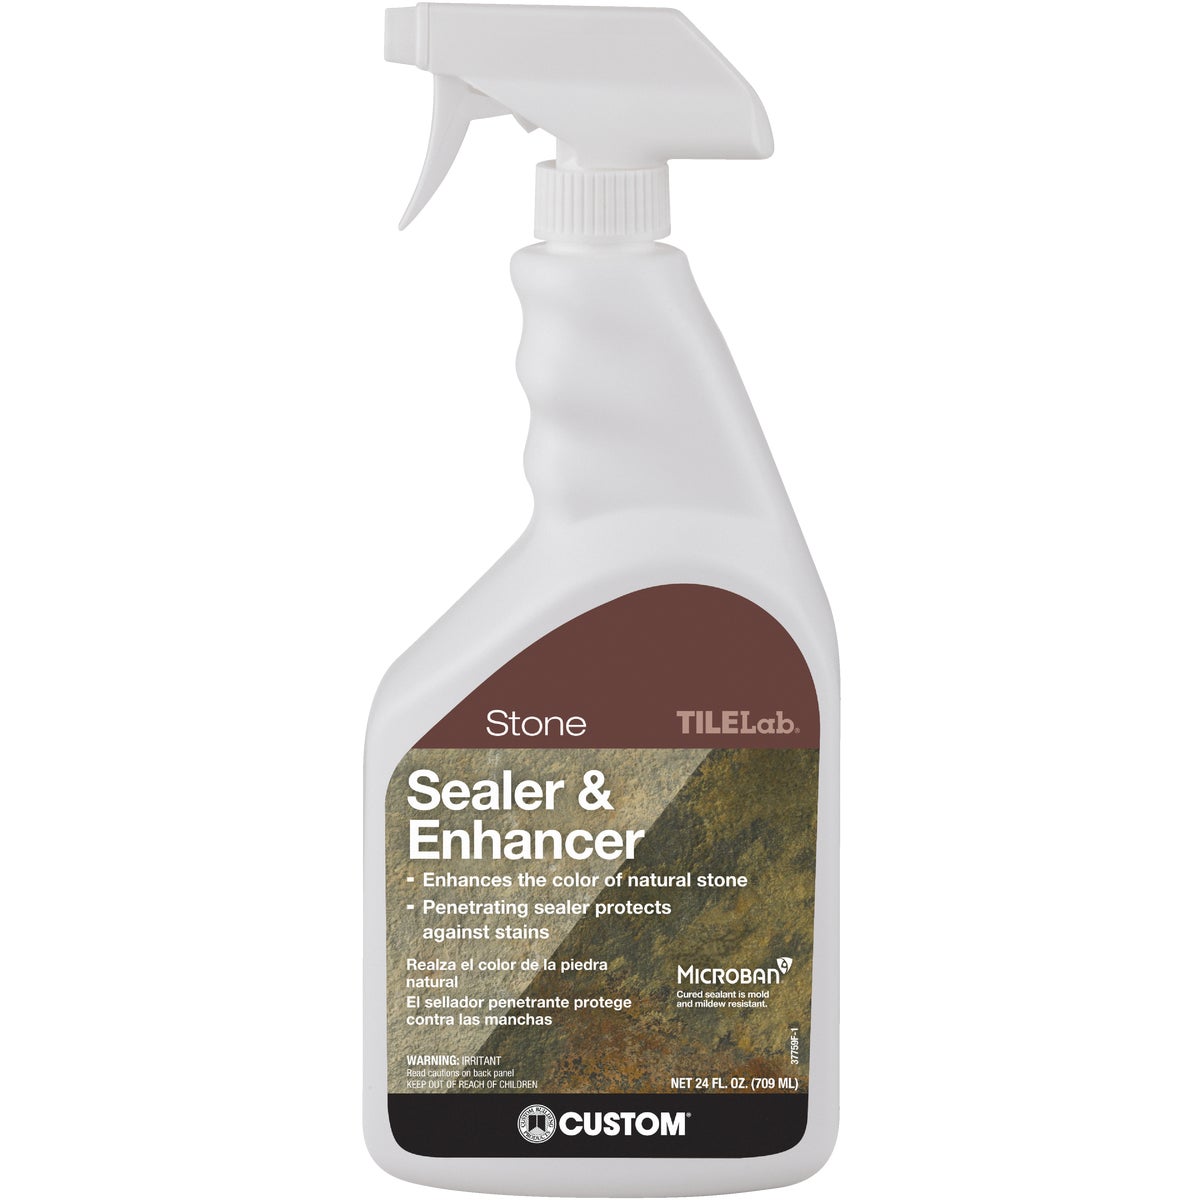 Item 272984, Color enhancer and penetrating sealer for all types of porous natural stone